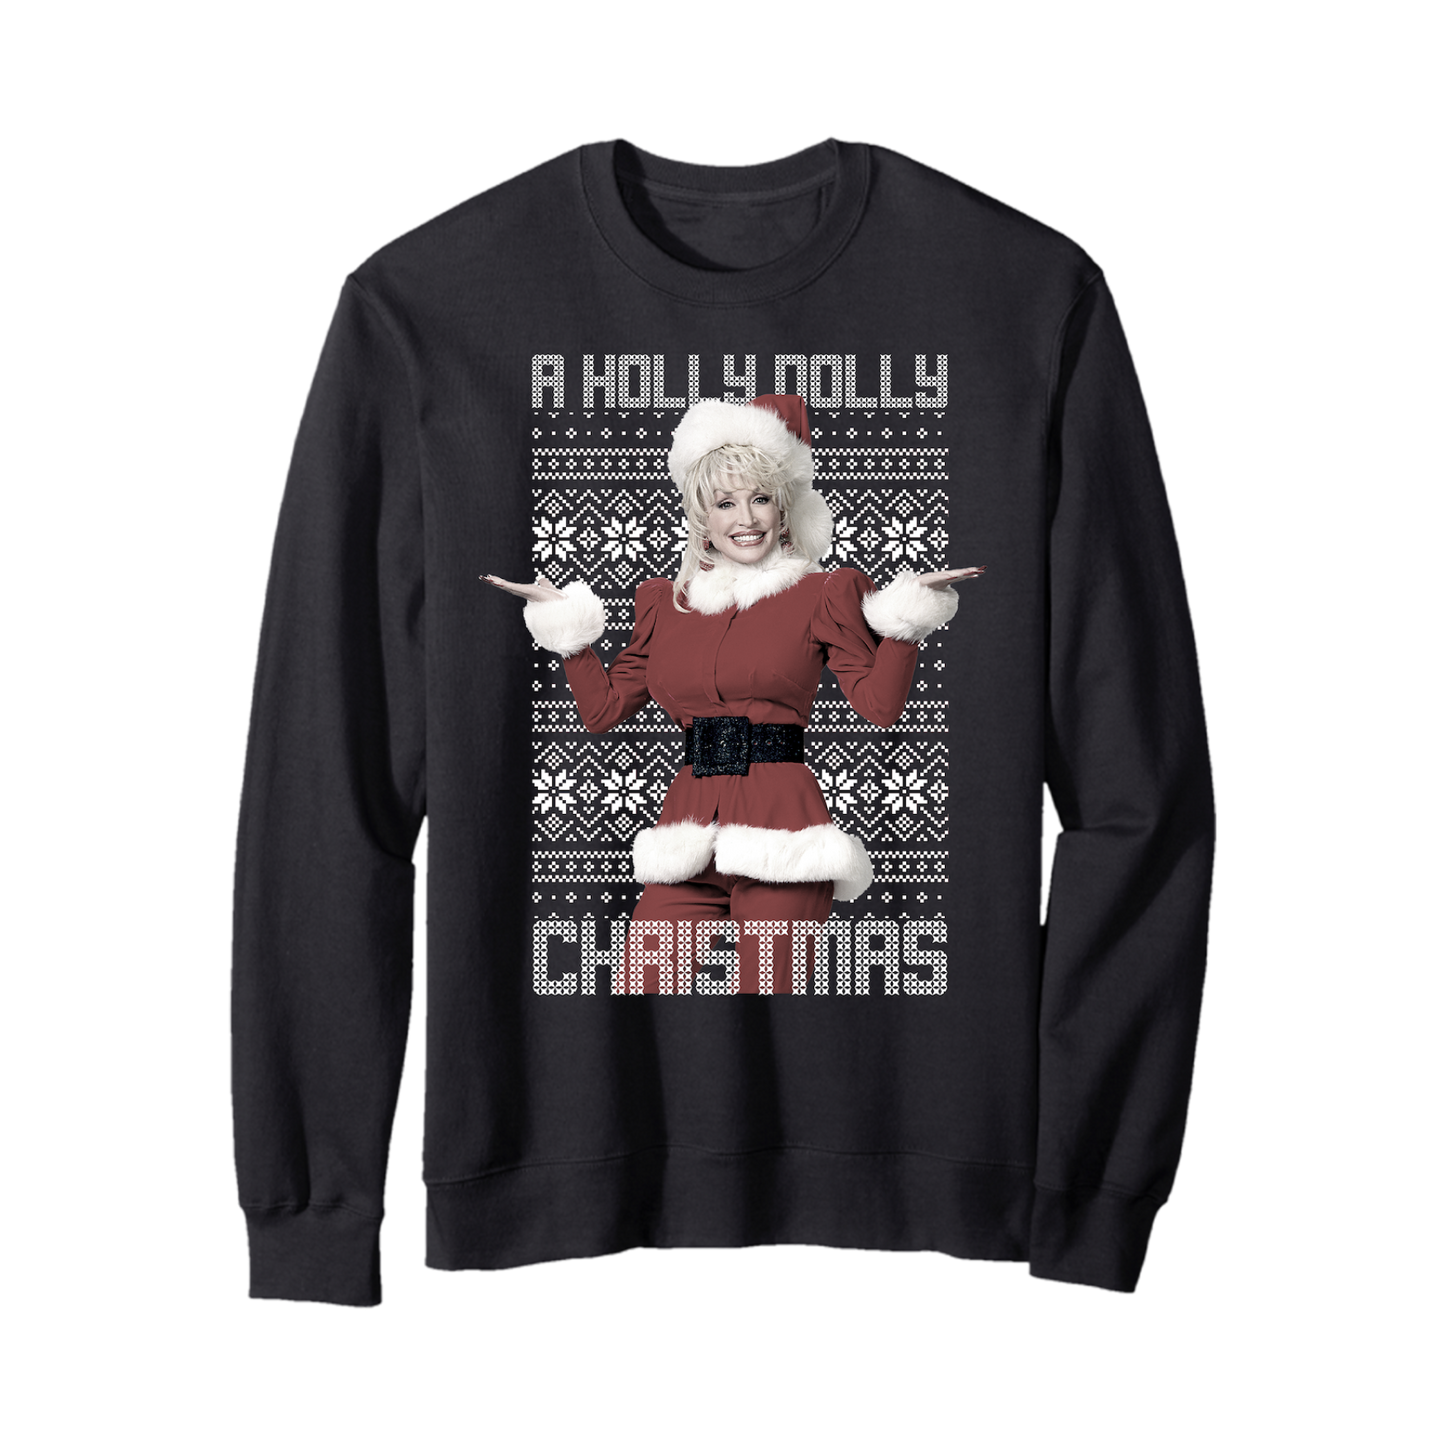 Holly Dolly Crewneck: Black sweater with Santa Claus for festive holiday style